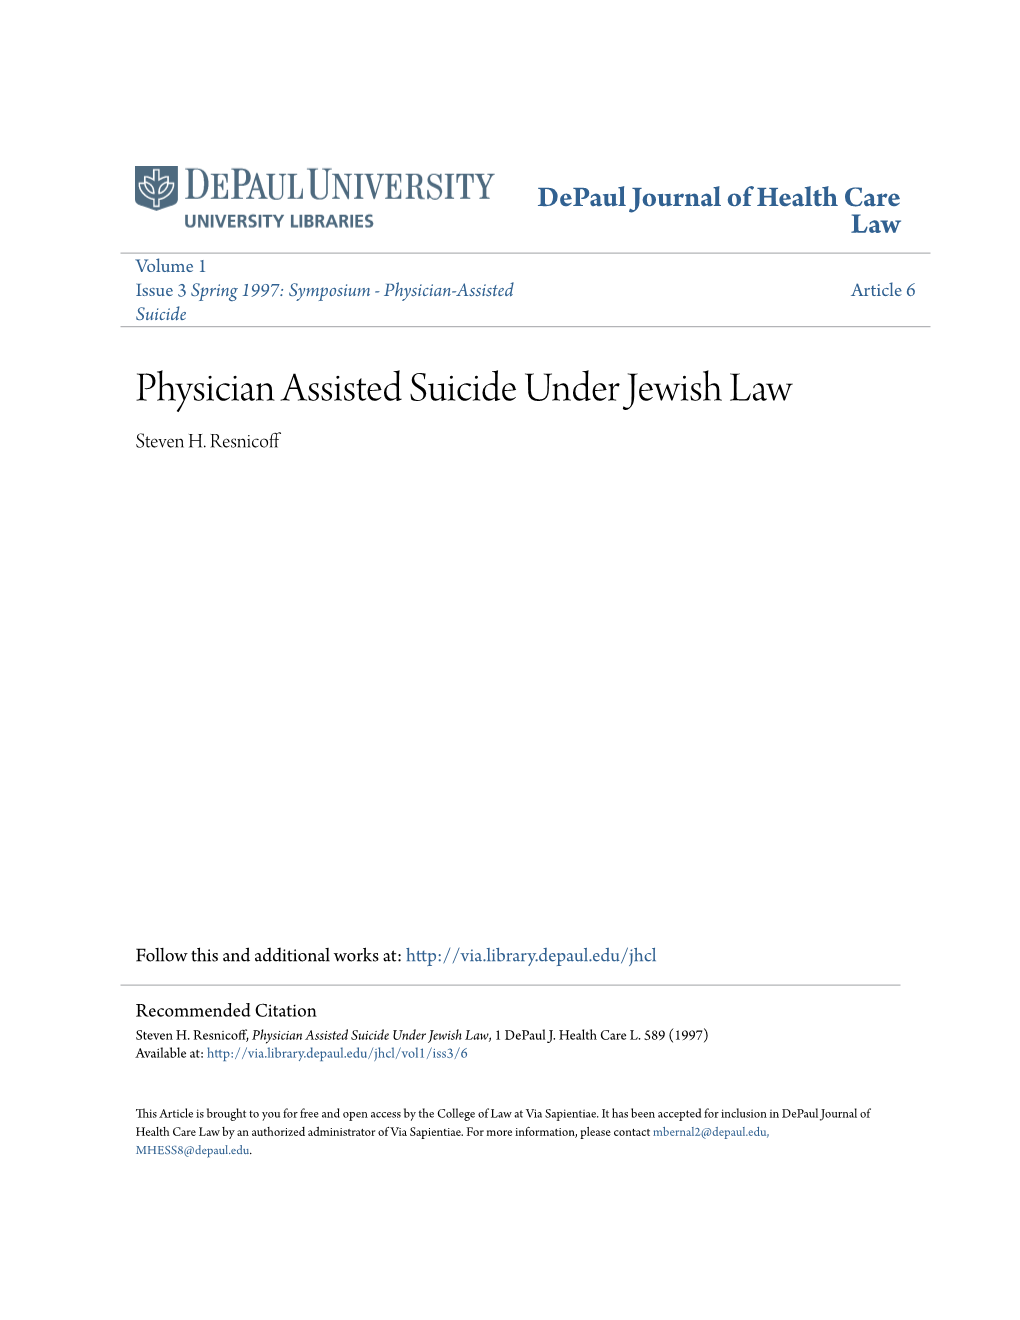 Physician Assisted Suicide Under Jewish Law Steven H